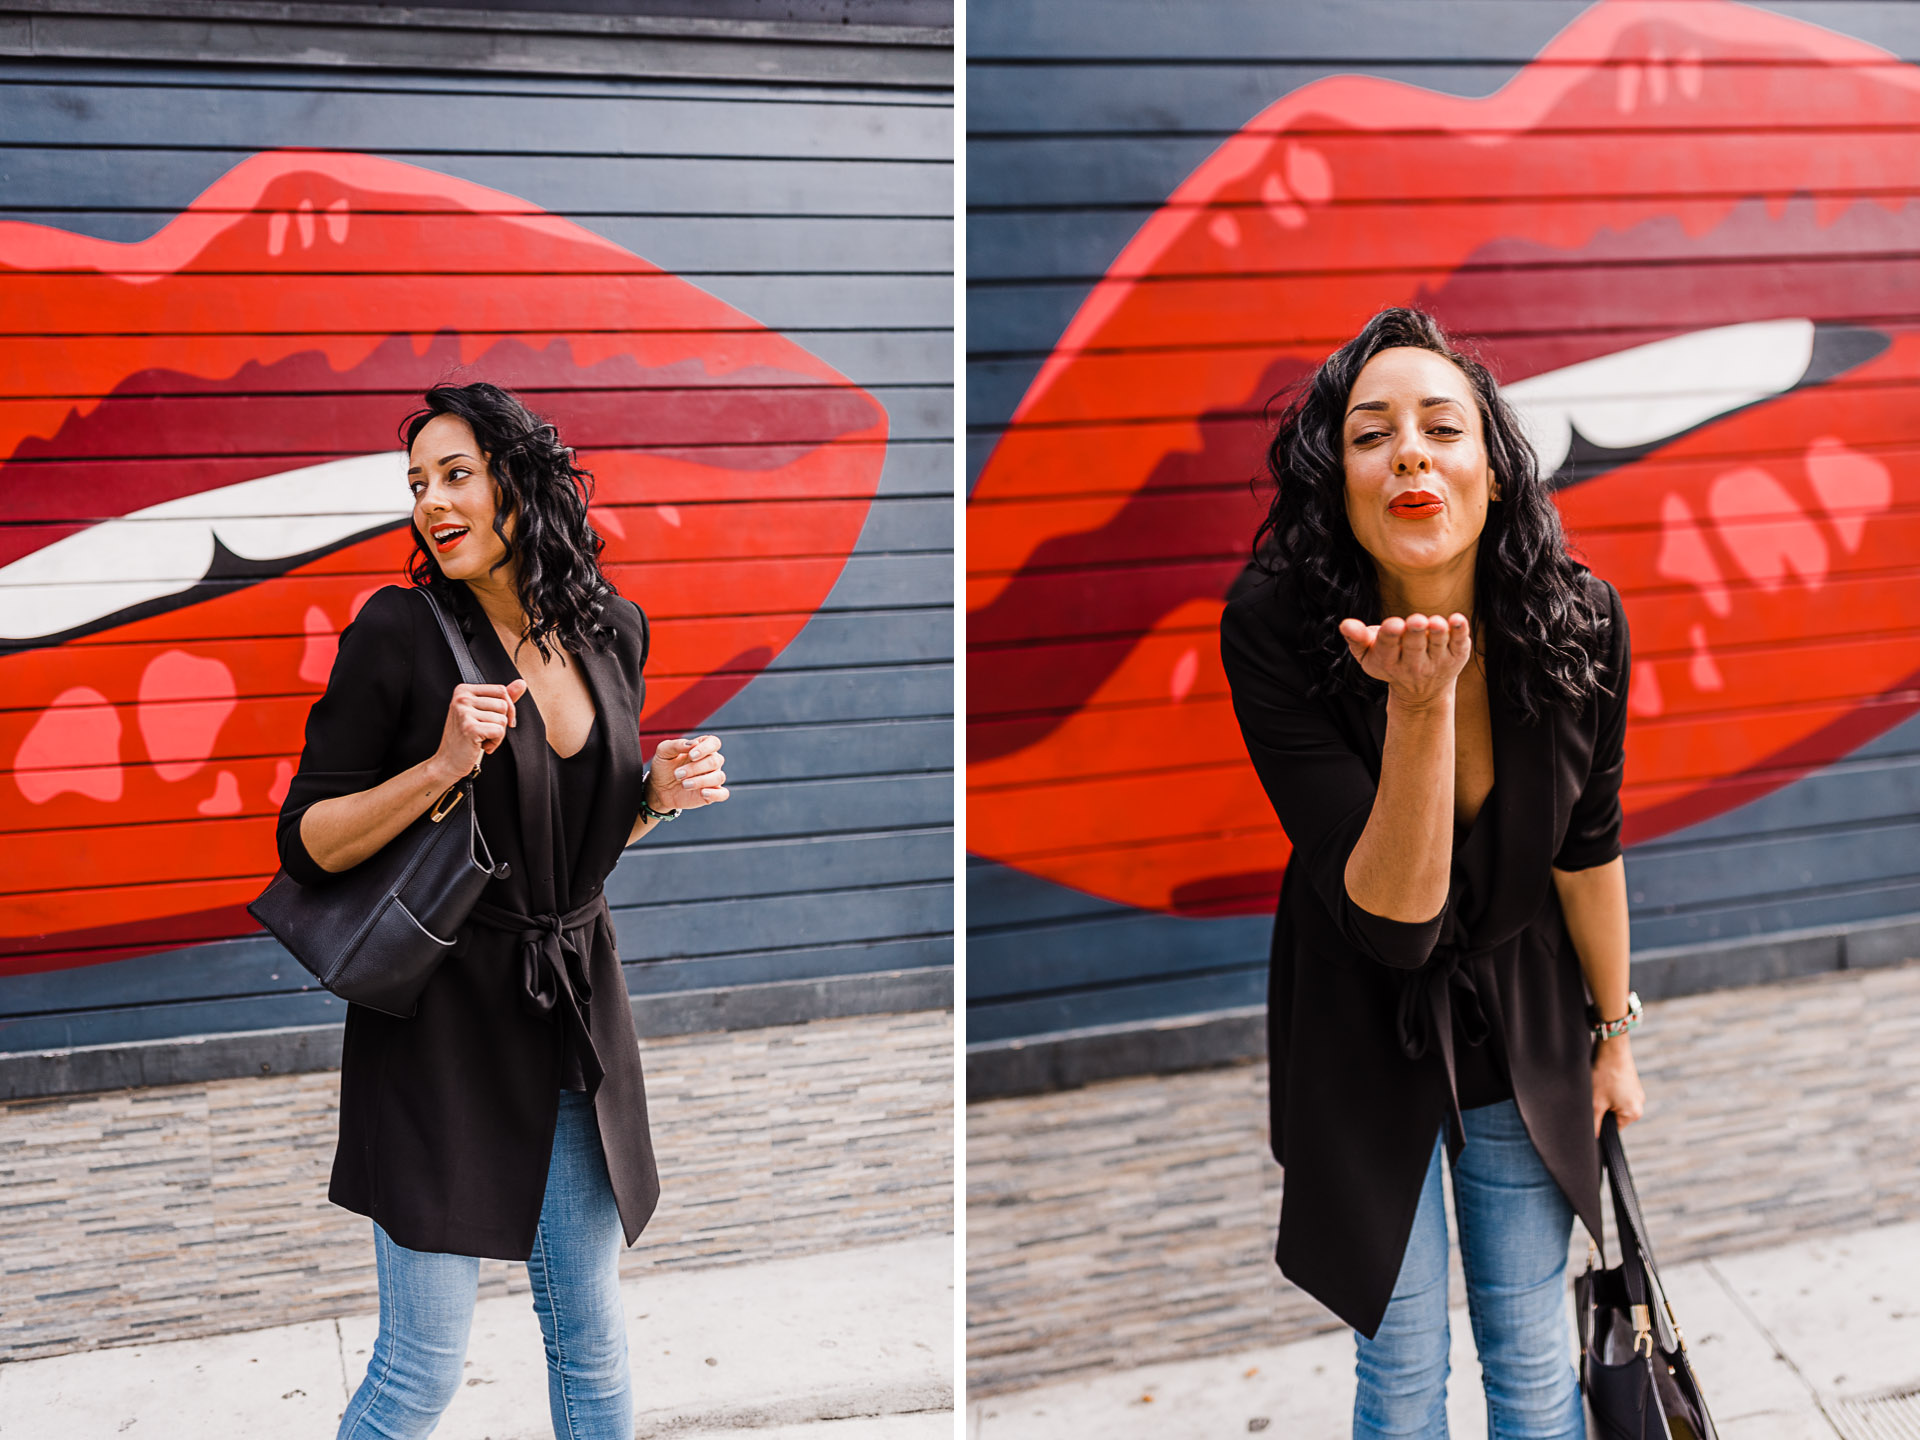 Woman walking down sidewalk in front of a red lipstick mural. She's wearing a black shirt, black blazer, and jeans.